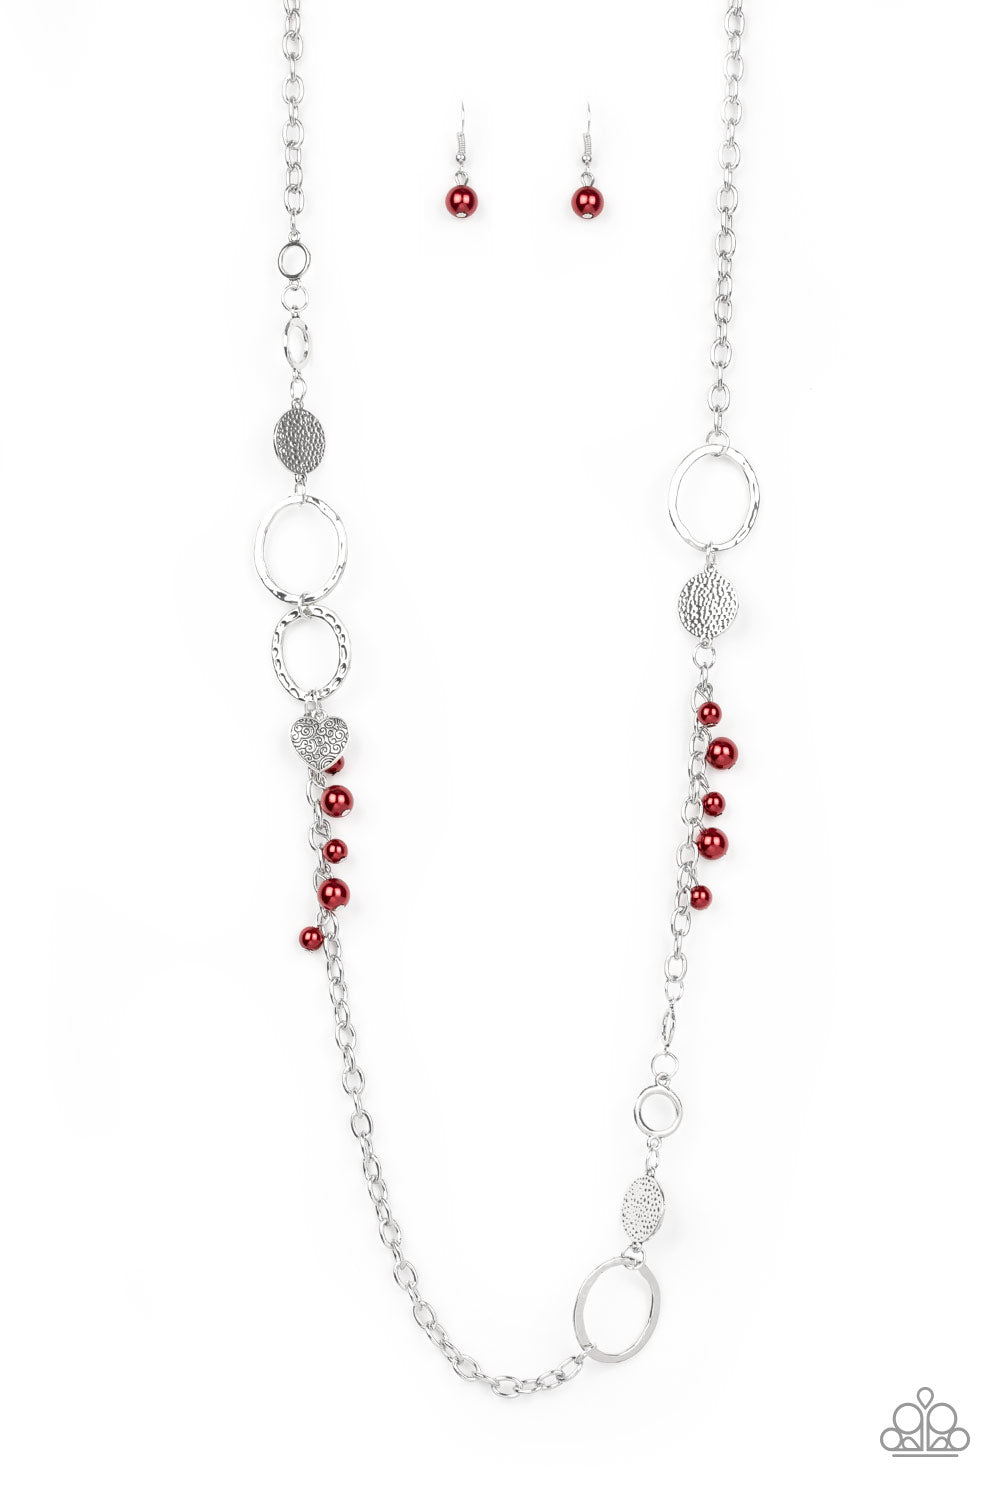 Unapologetic Flirt - red - Paparazzi necklace